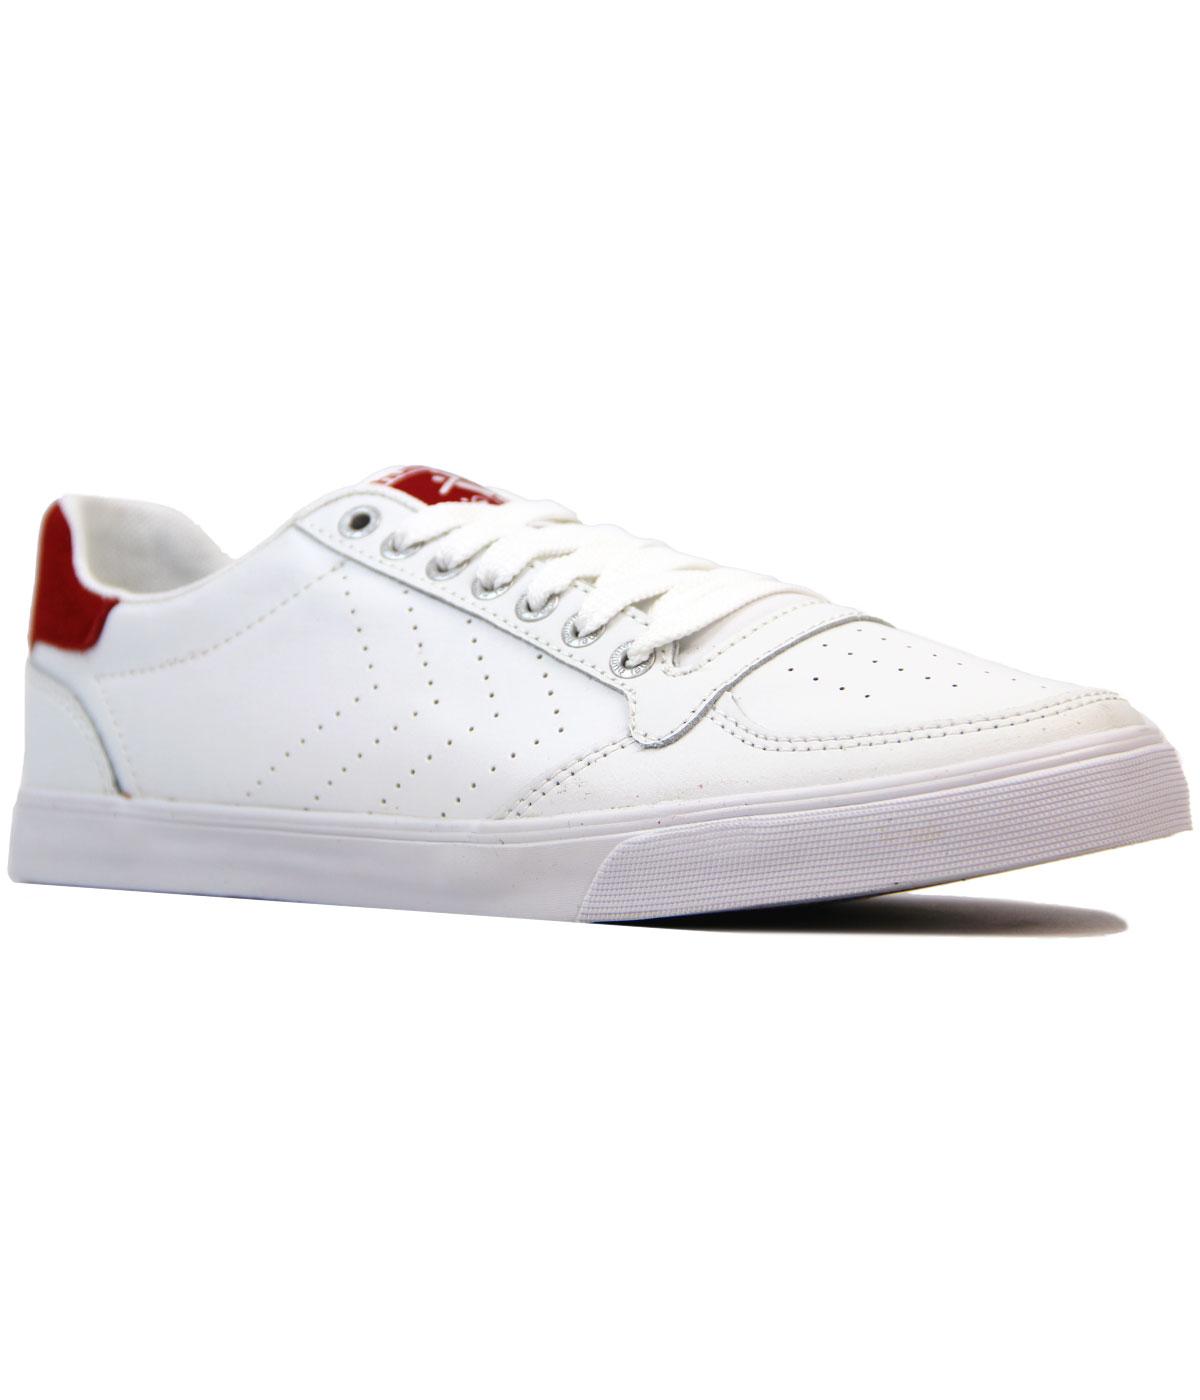 HUMMEL Slimmer Stadil Ace 1970s Tennis Trainers White/Red